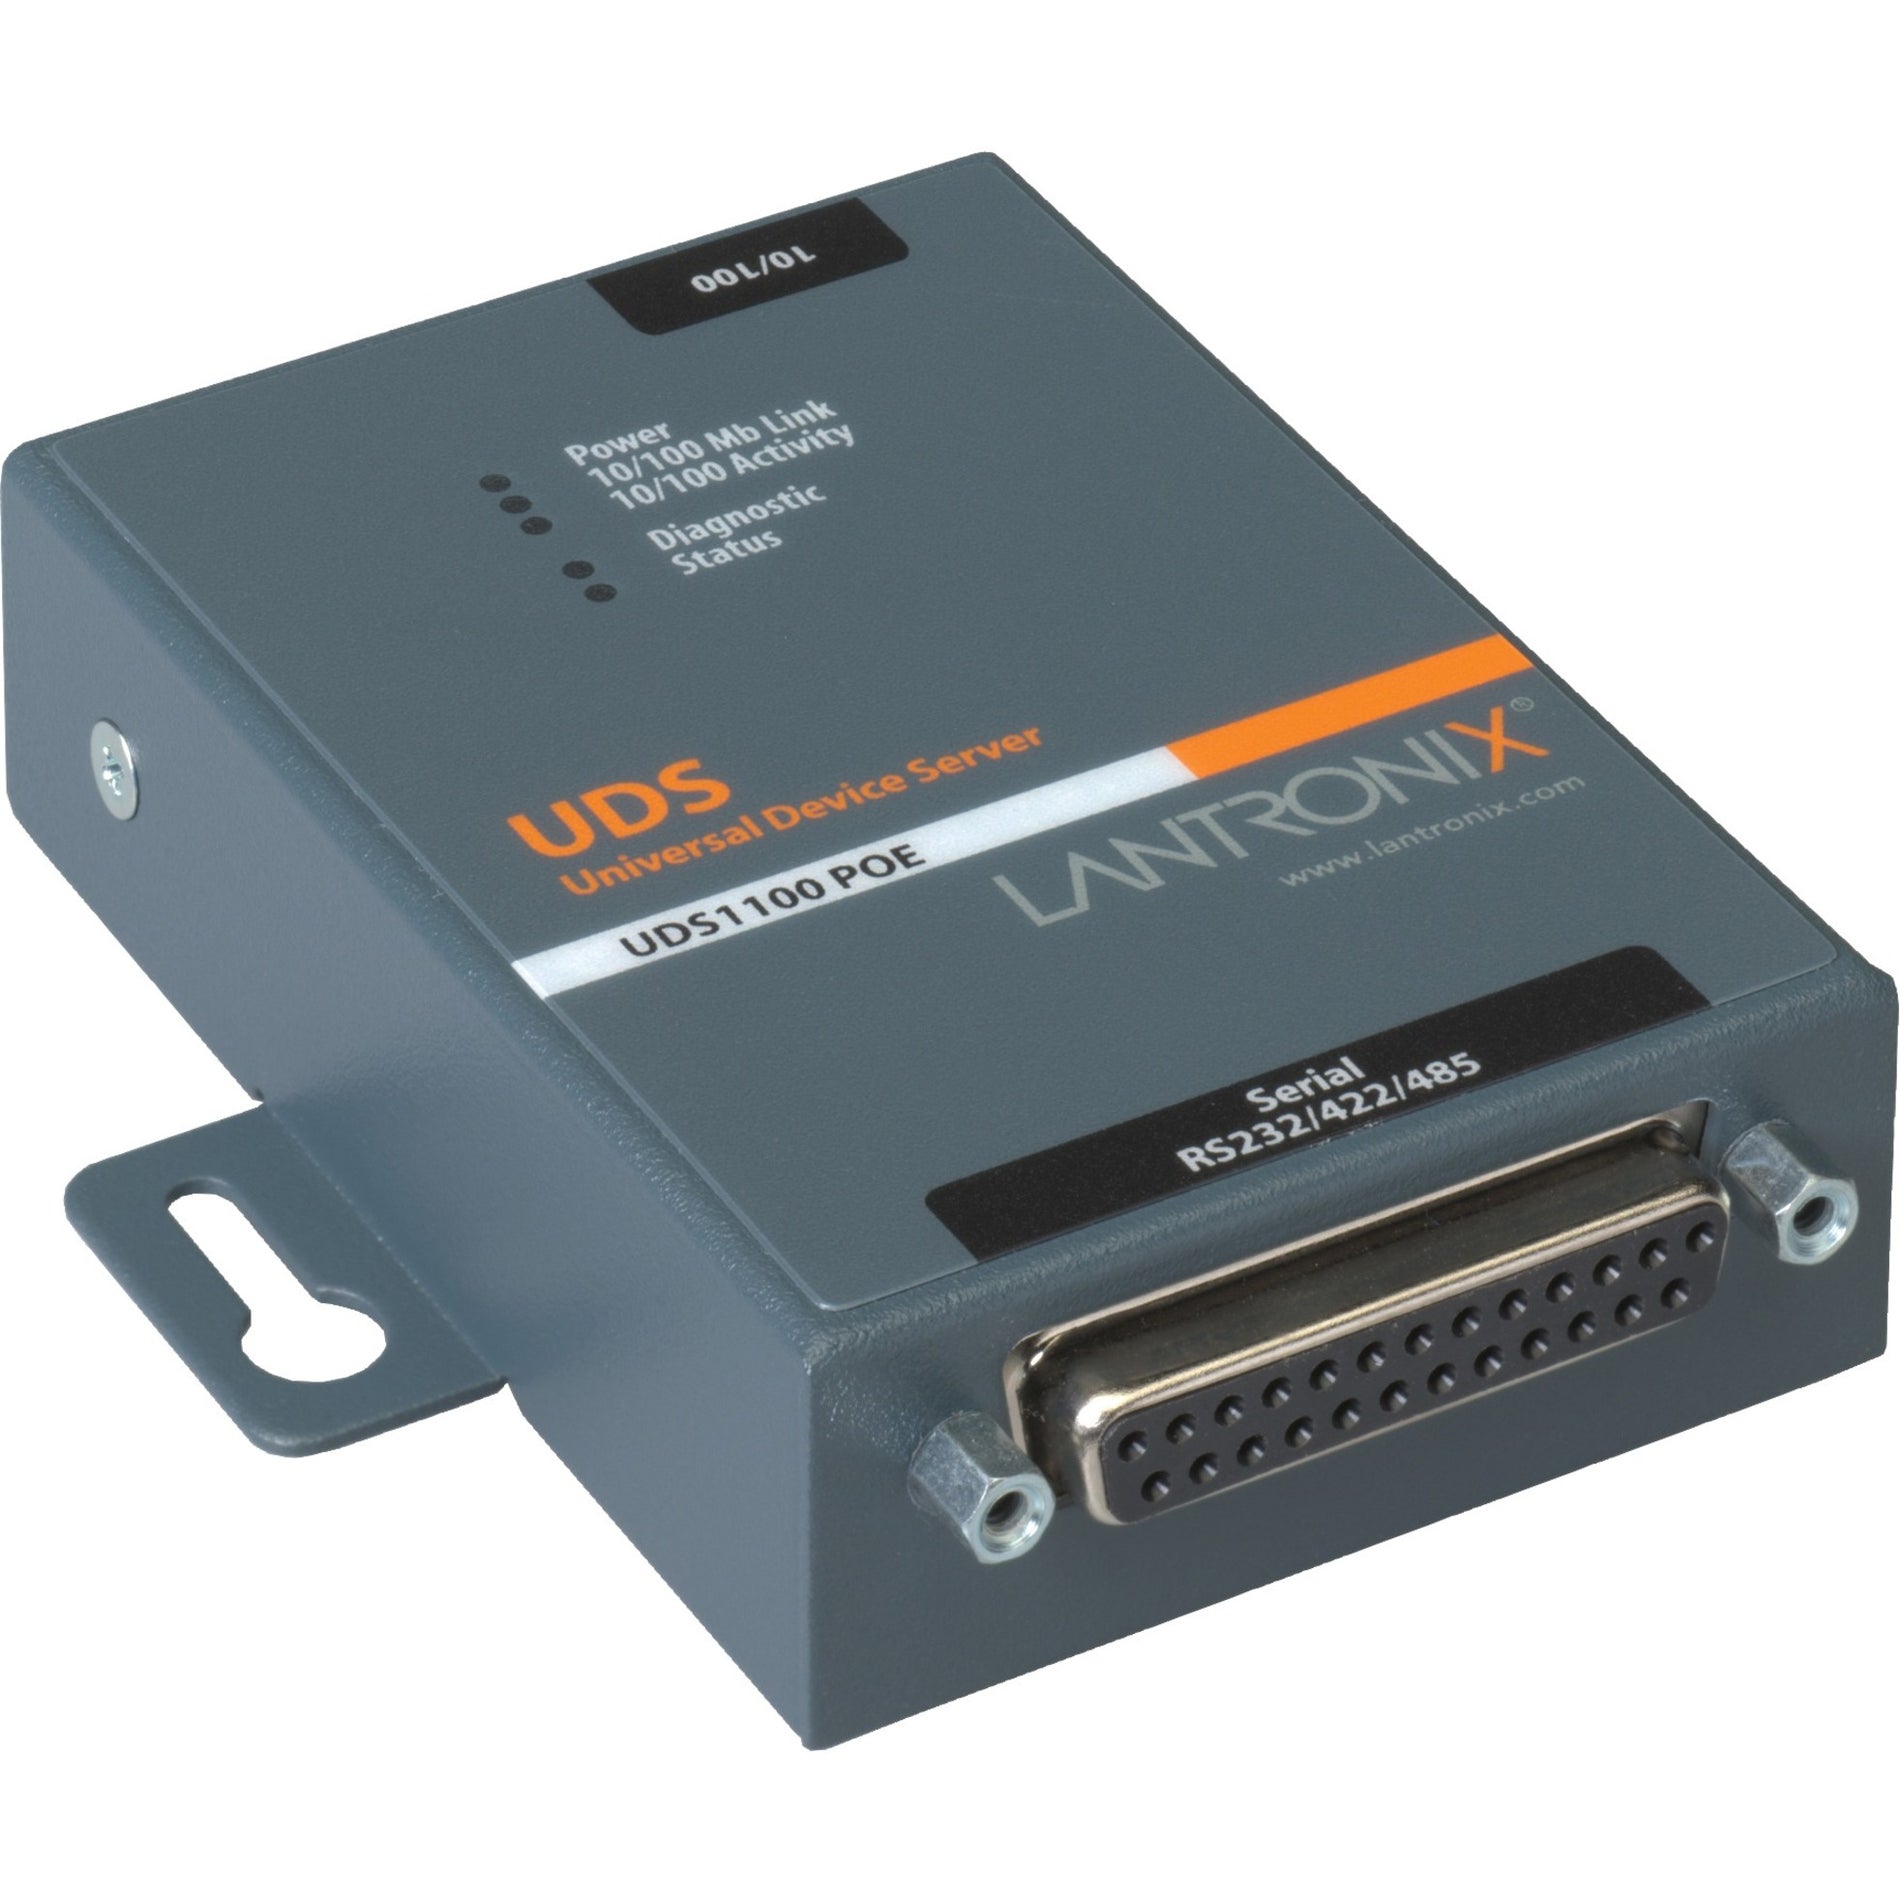 Lantronix UD11000P0-01 UDS1100 Device Server with PoE, 1-Port 10/100 Ethernet, Software-Selectable RS232/RS422/RS485